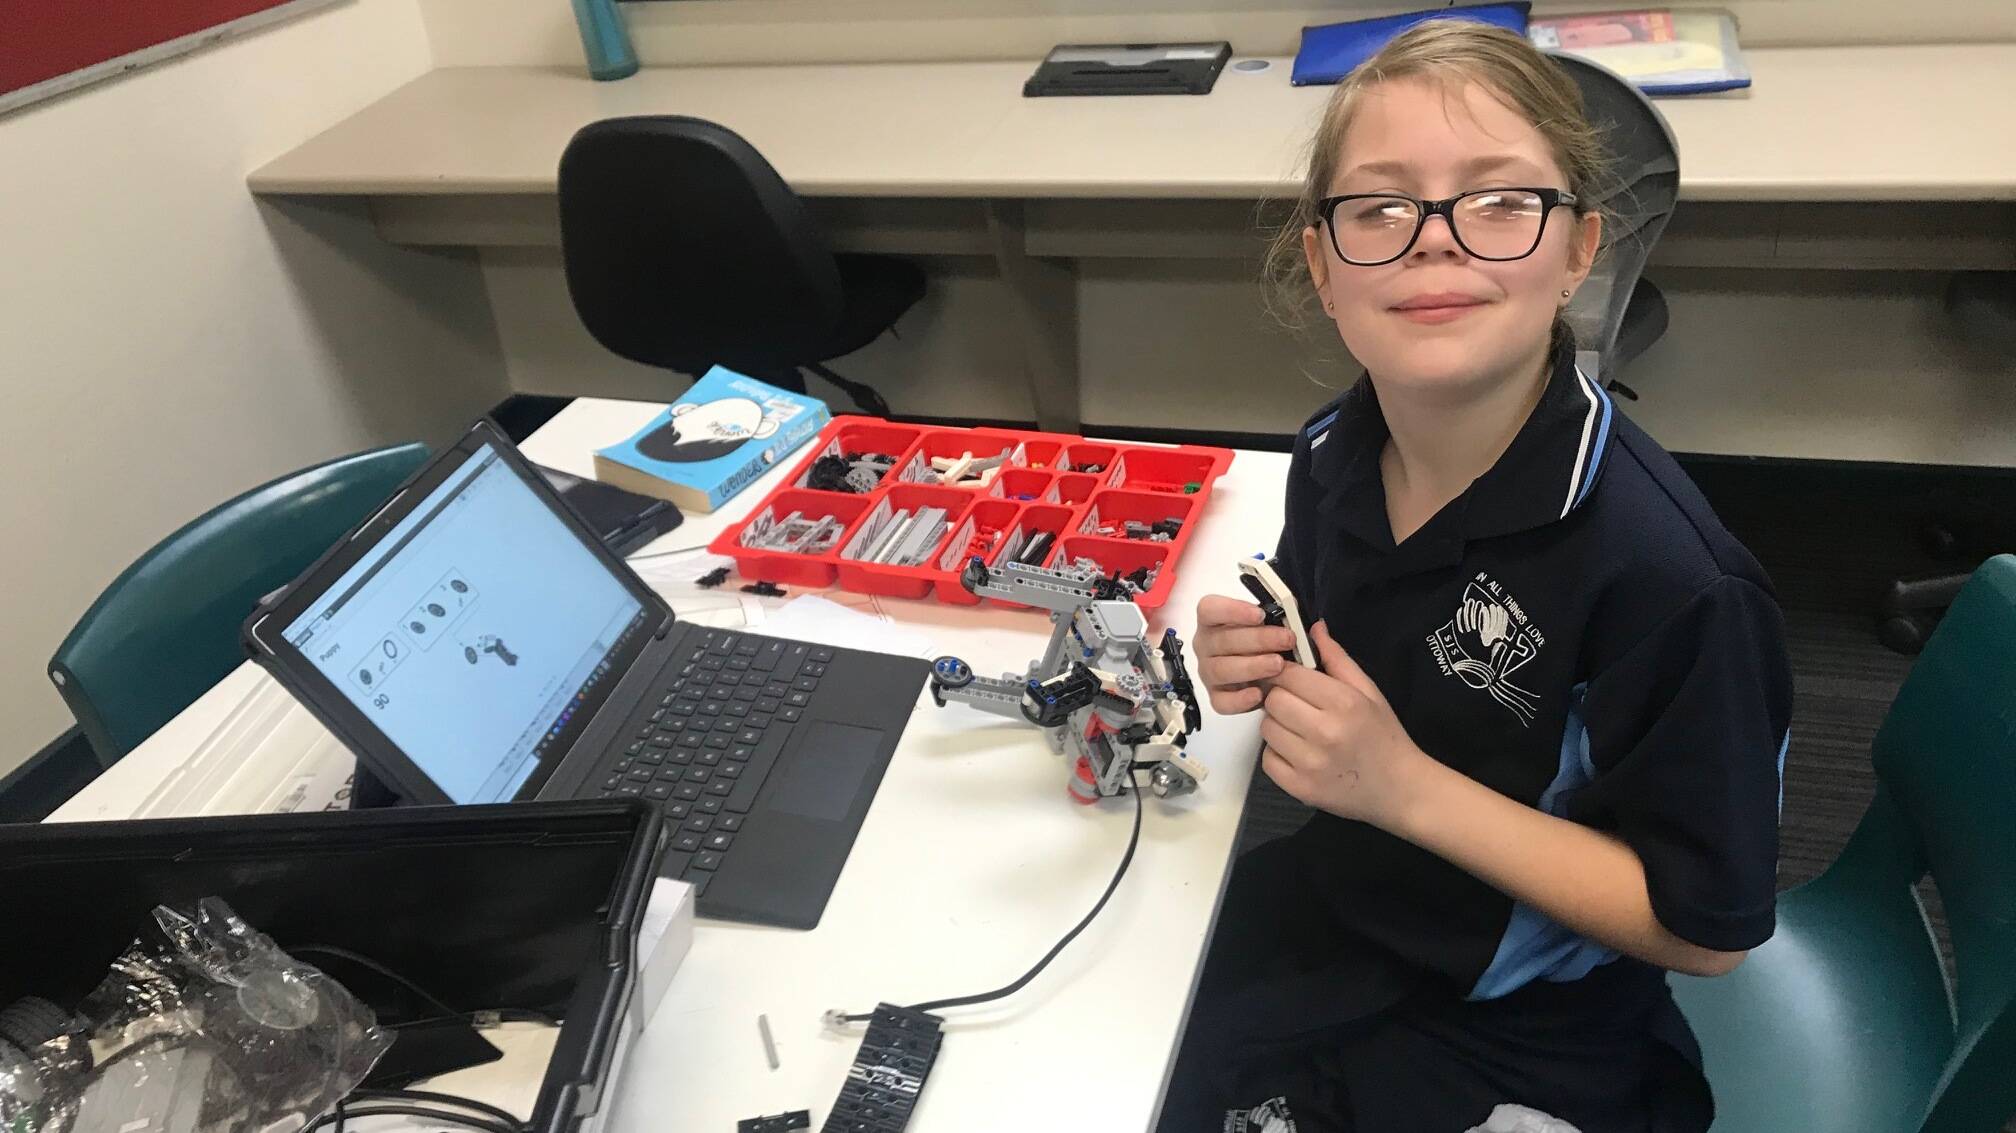 Over the last few years, St Josephs School in Ottoway, South Australia, has built up an impressive library of STEM resources thanks to Bright Future Grants from the nearby Mobil Birkenhead terminal.